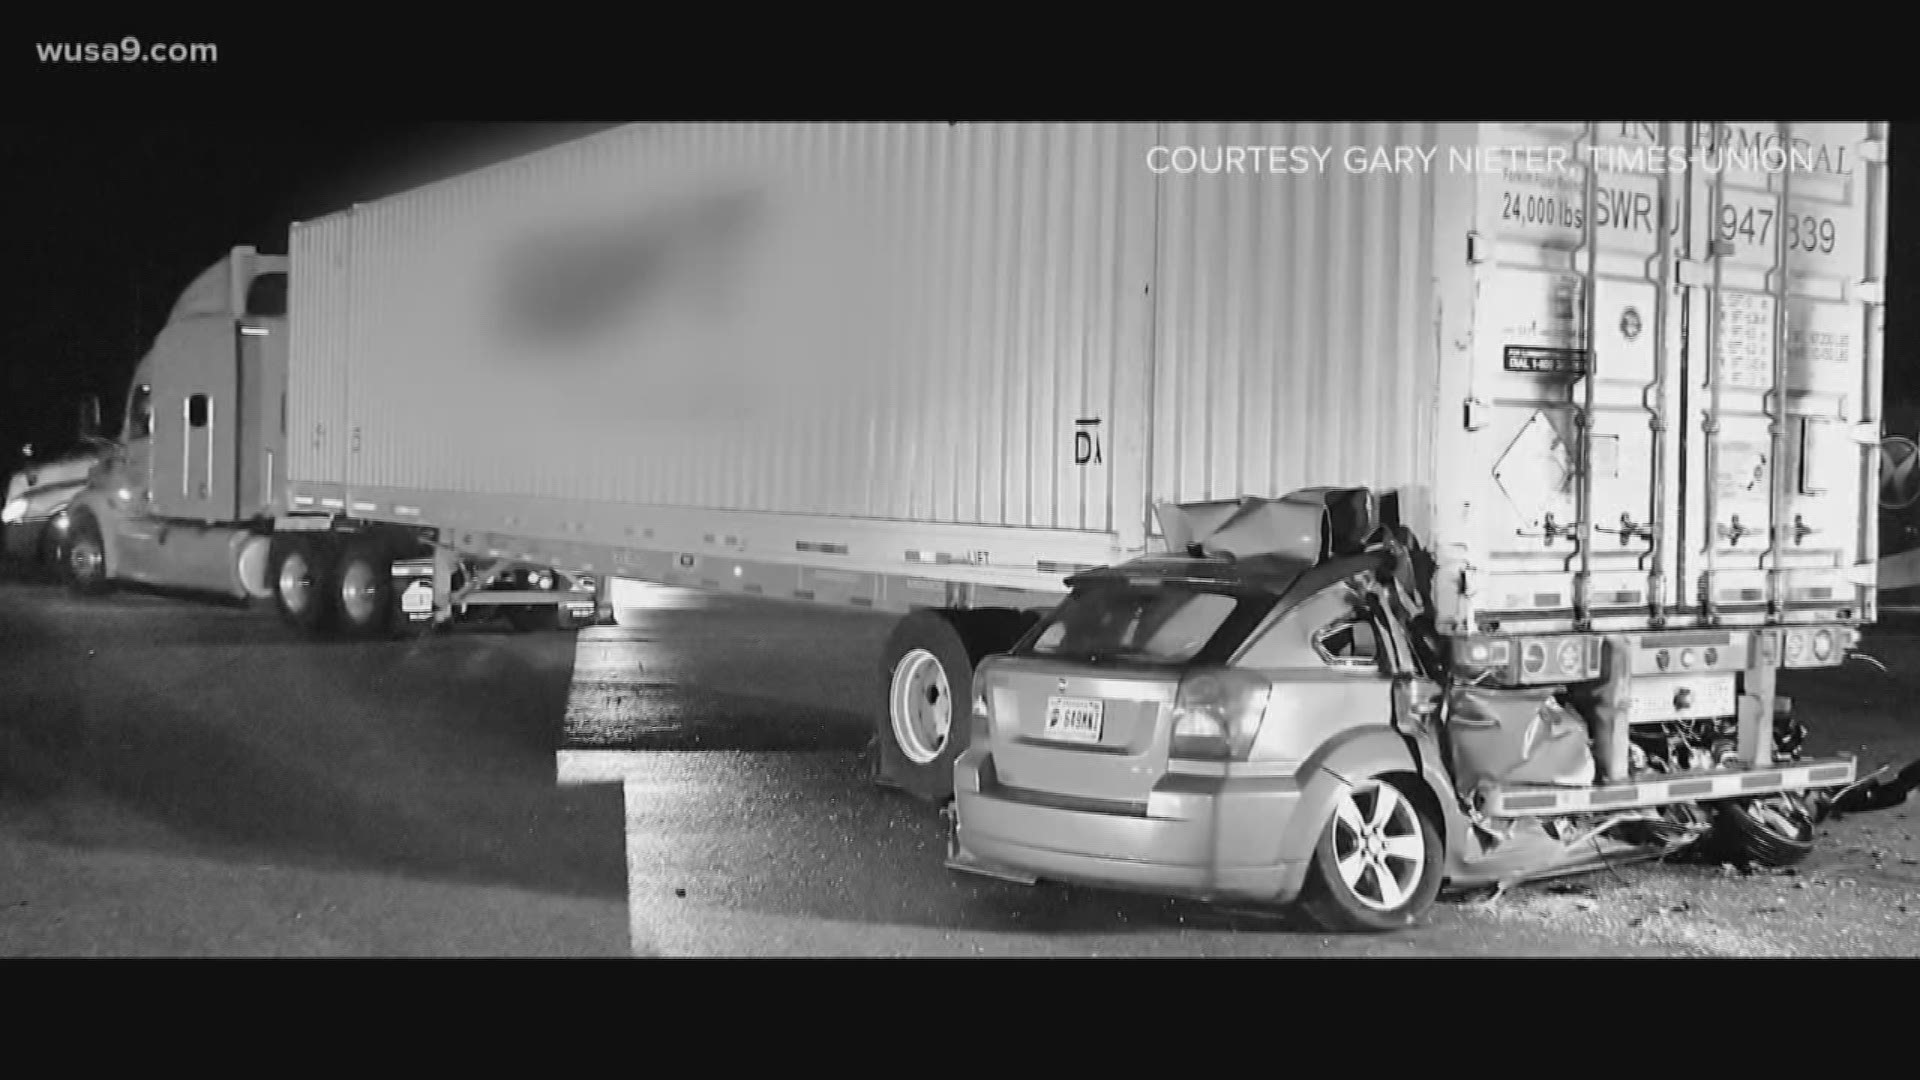 WUSA9’s series of reports on deadly crashes known as “underride accidents” began in 2017. Now, the largest ever verdict against a trucking company for one of those underride accidents is exposing how the industry secretly fought new safety features for more than a decade -- despite knowing the risks.